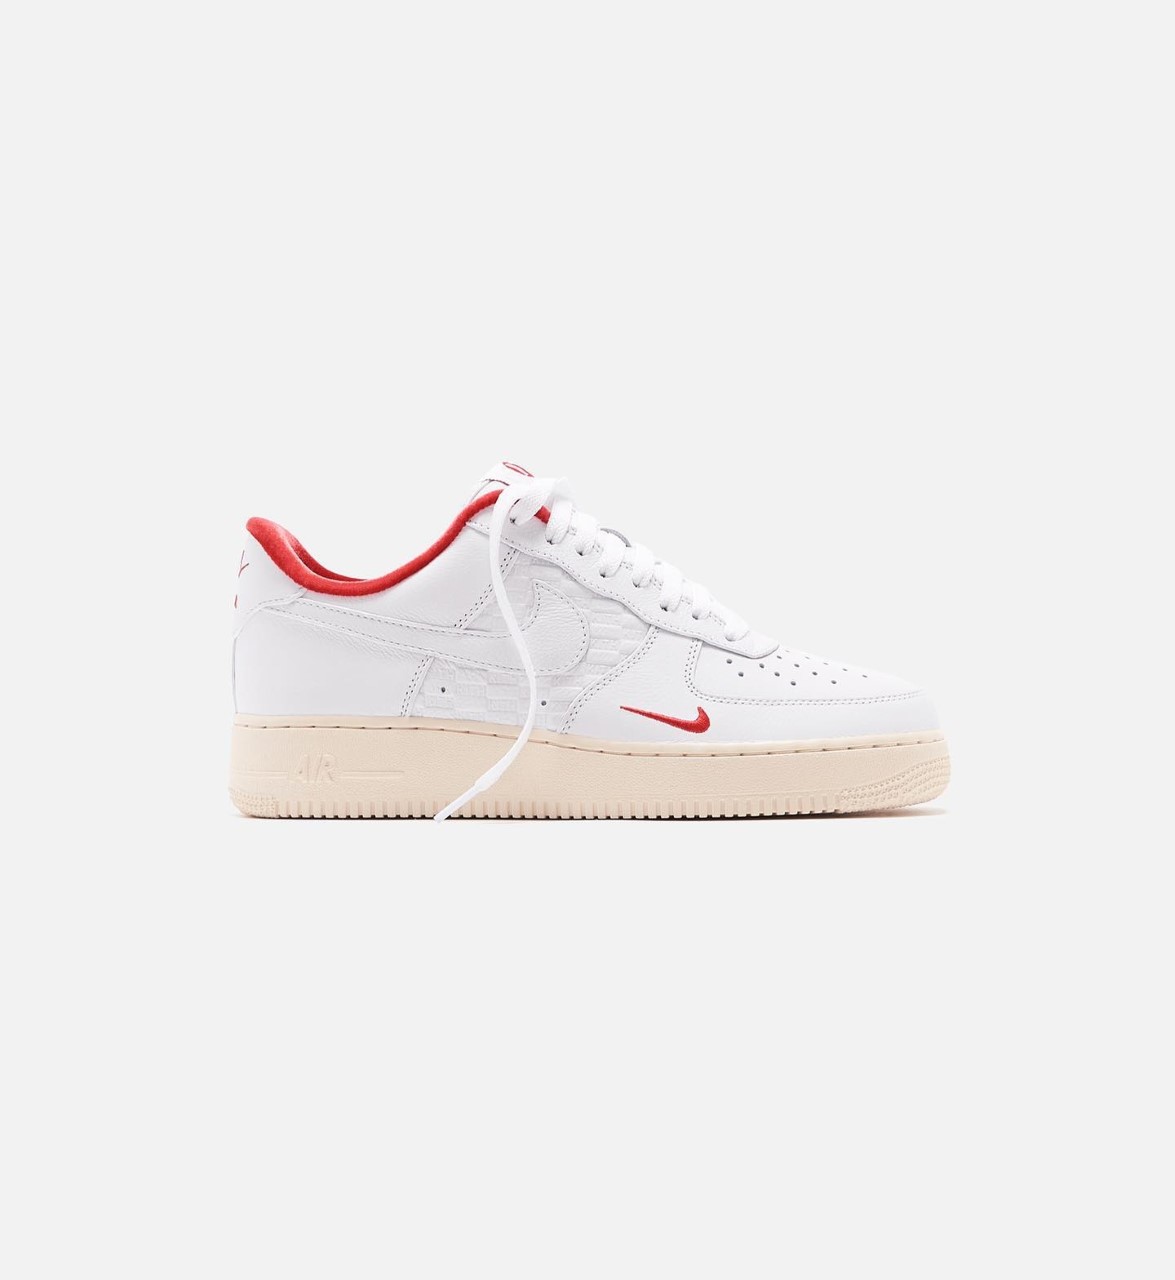 Kith x Nike Air Force 1 Low "Tokyo" Release Details | Sneaker Buzz